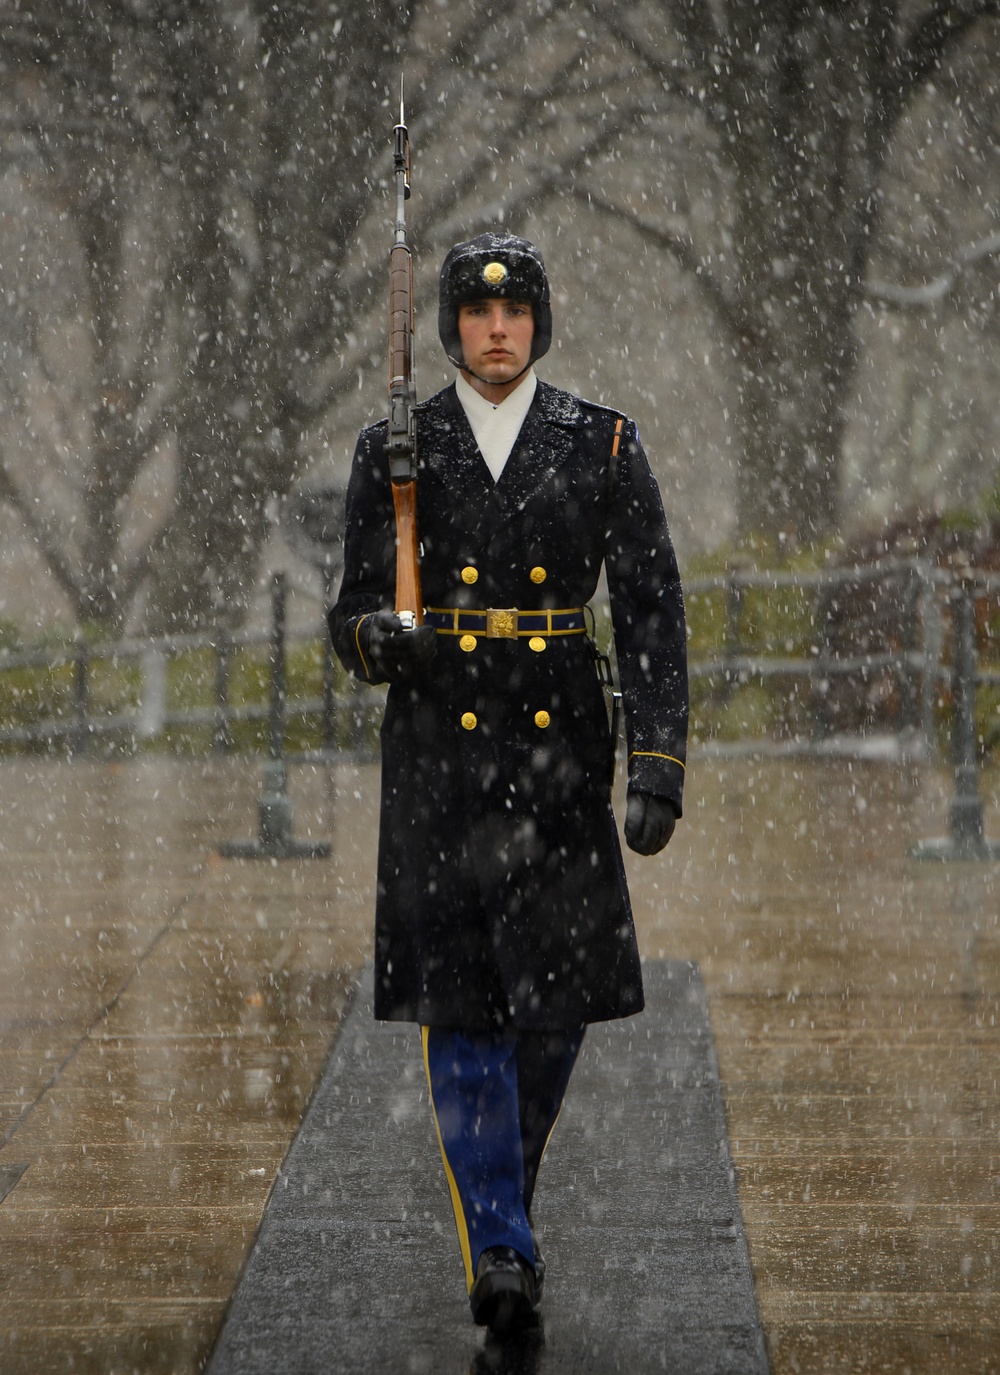 First DC snowfall doesn't hinder Tomb Sentinels